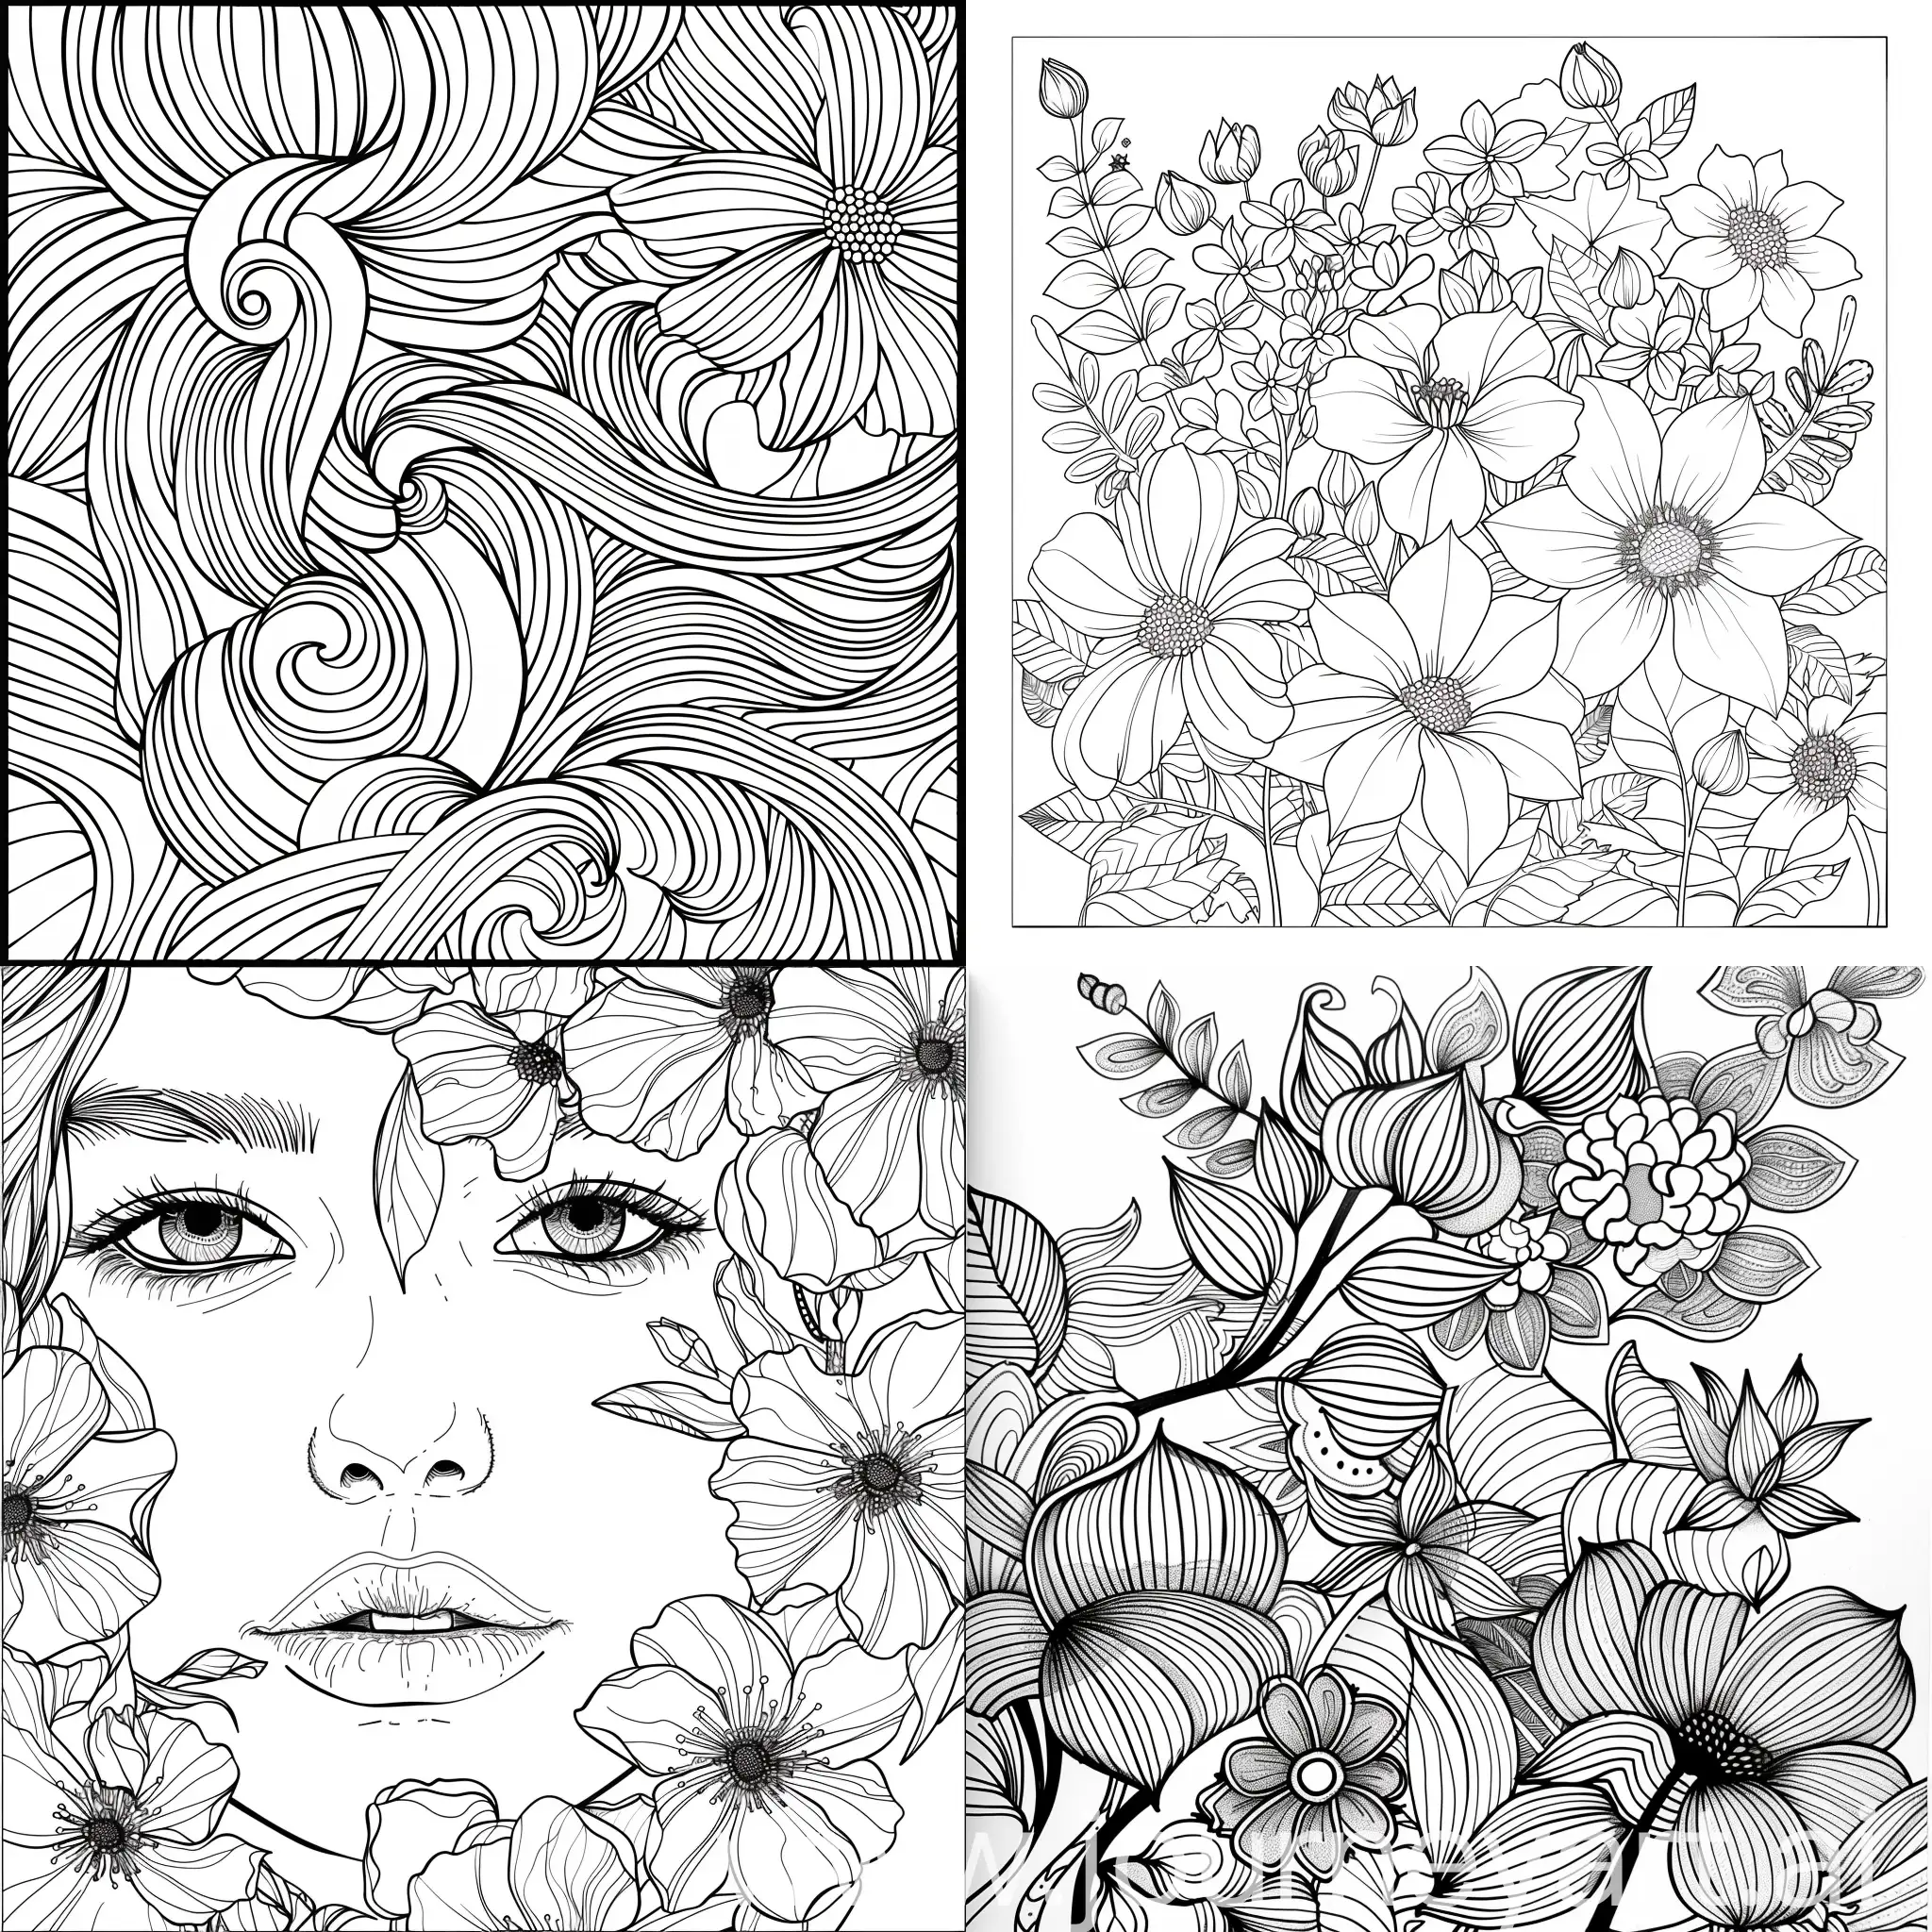 Mindfulness-Coloring-Page-with-Clean-Lines-on-White-Background